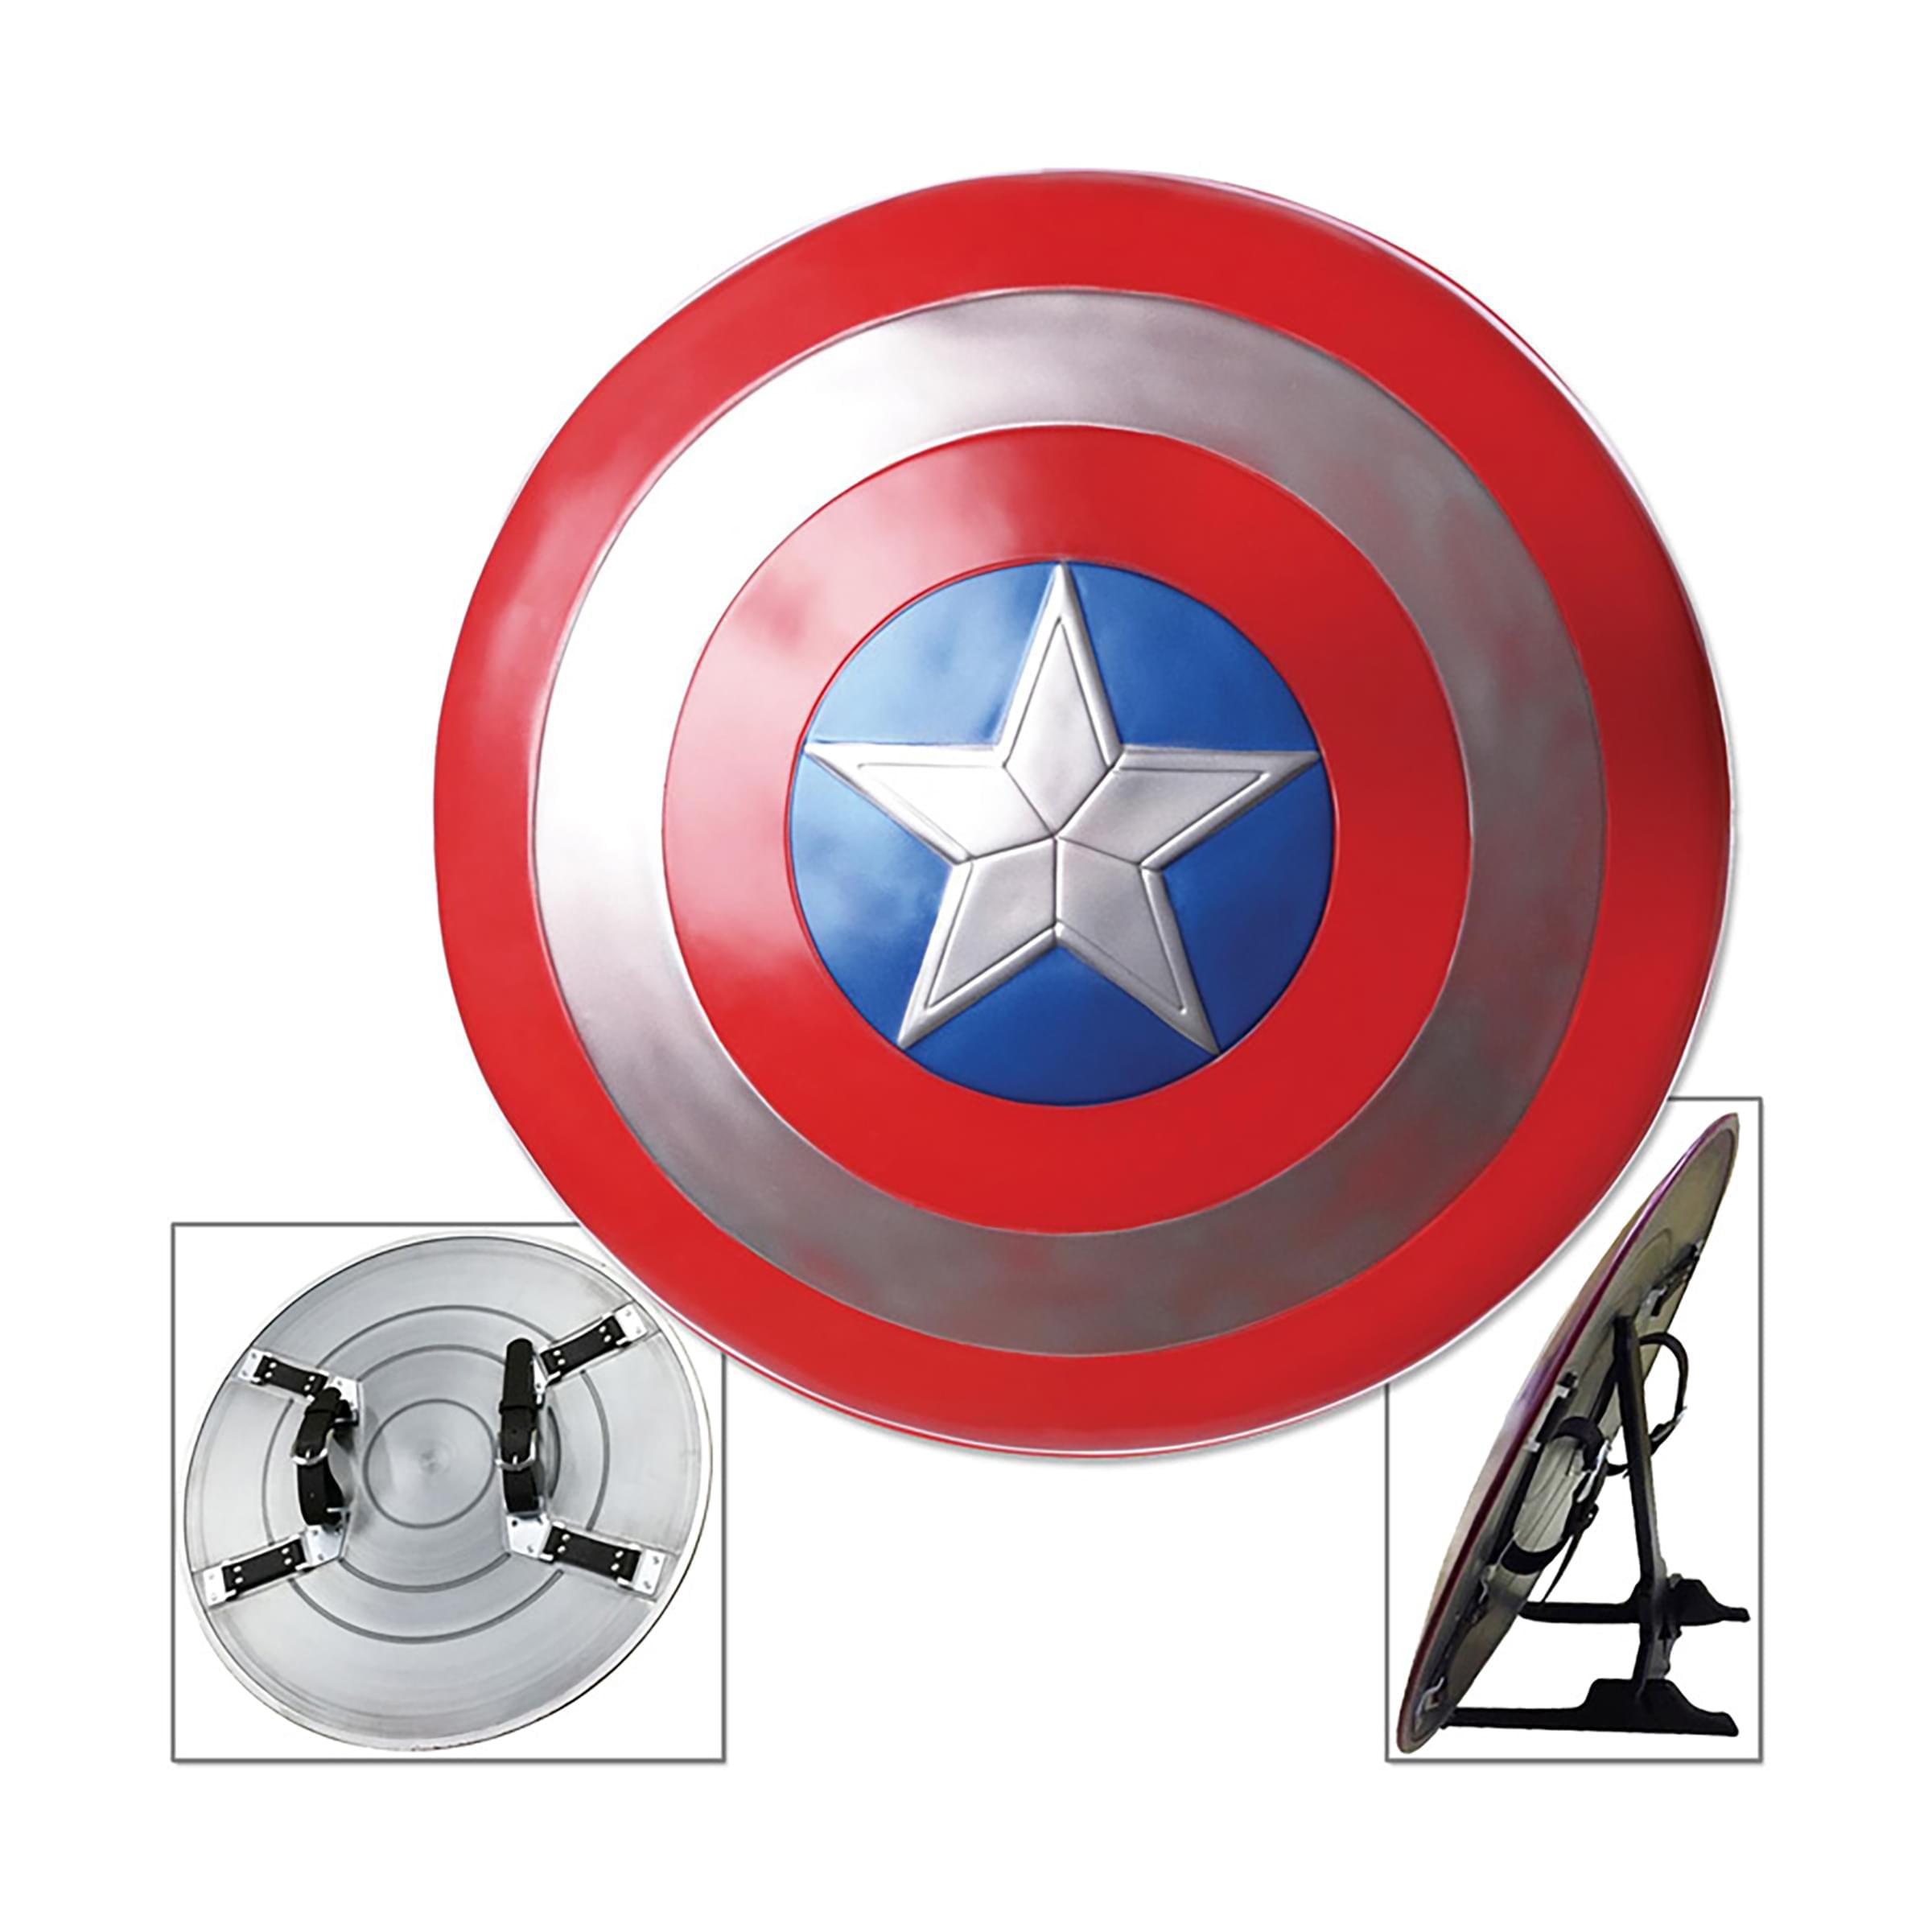 CAPTAIN AMERICA The First Avenger  Complete  MINI-MASTER  Trading Card Set 